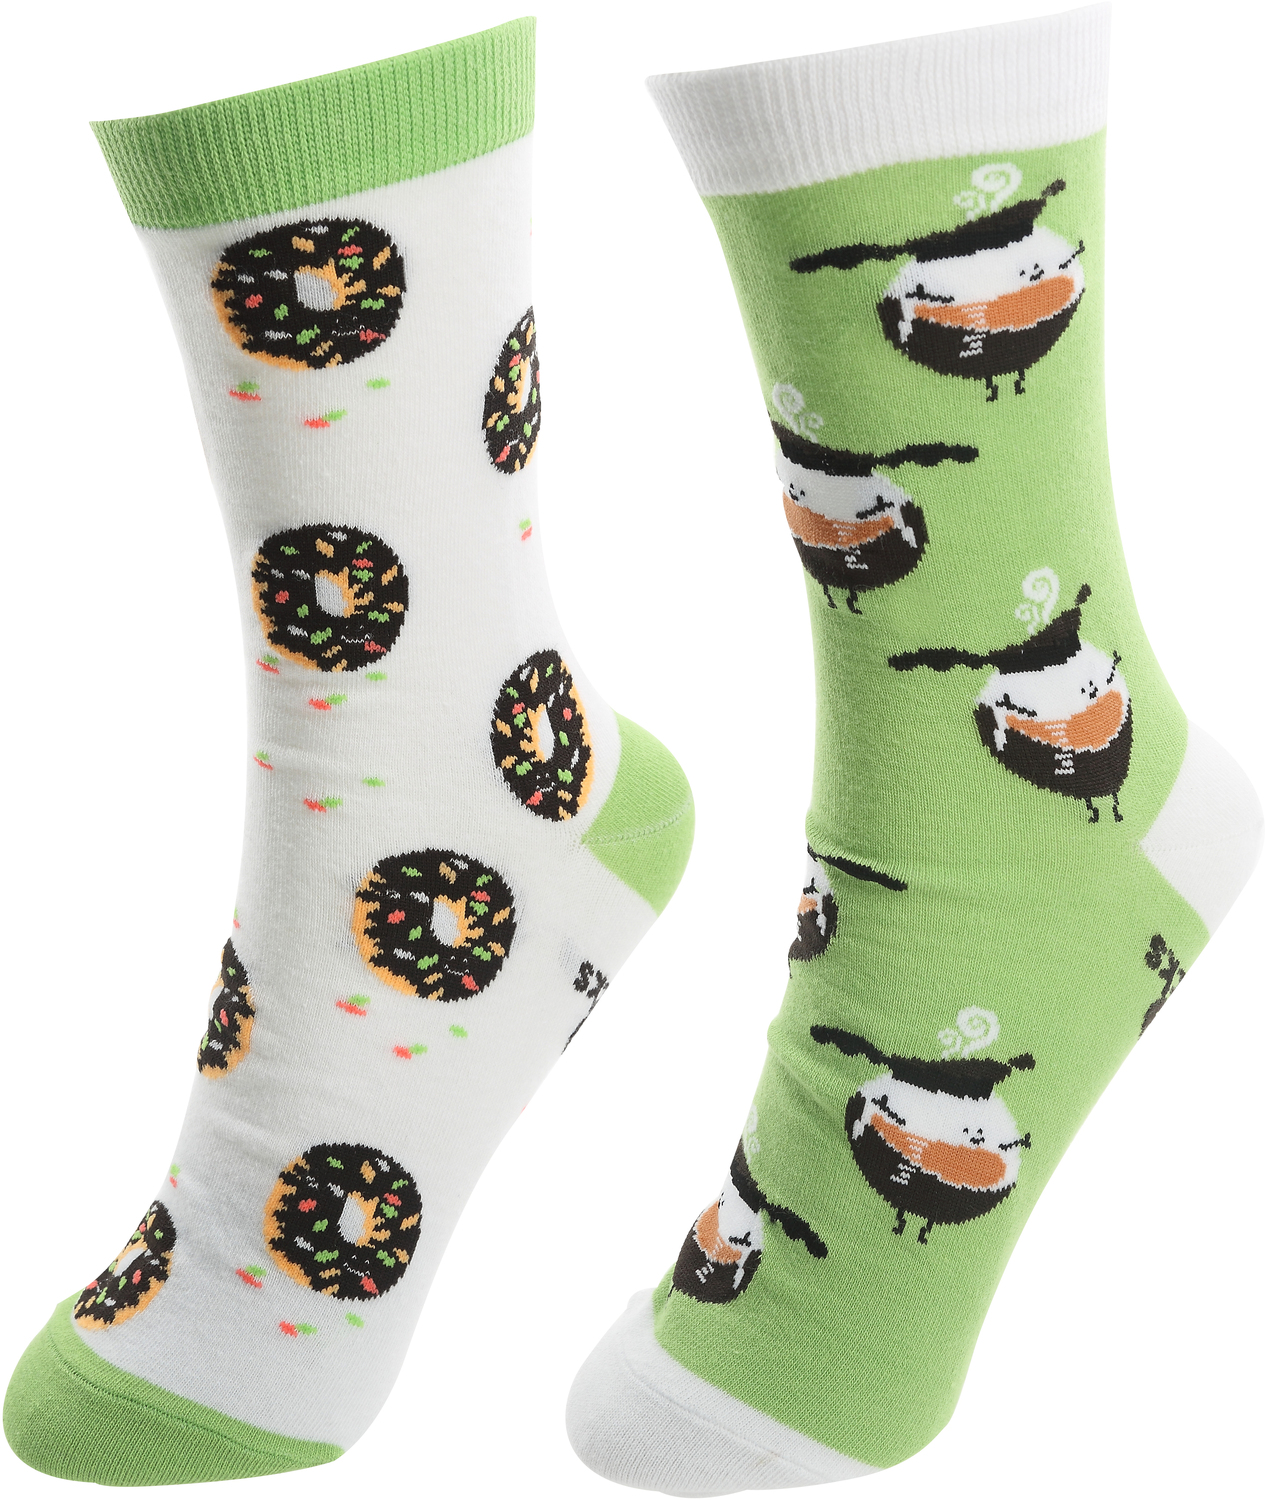 Coffee and Donut by Late Night Snacks - Coffee and Donut - S/M Unisex Socks